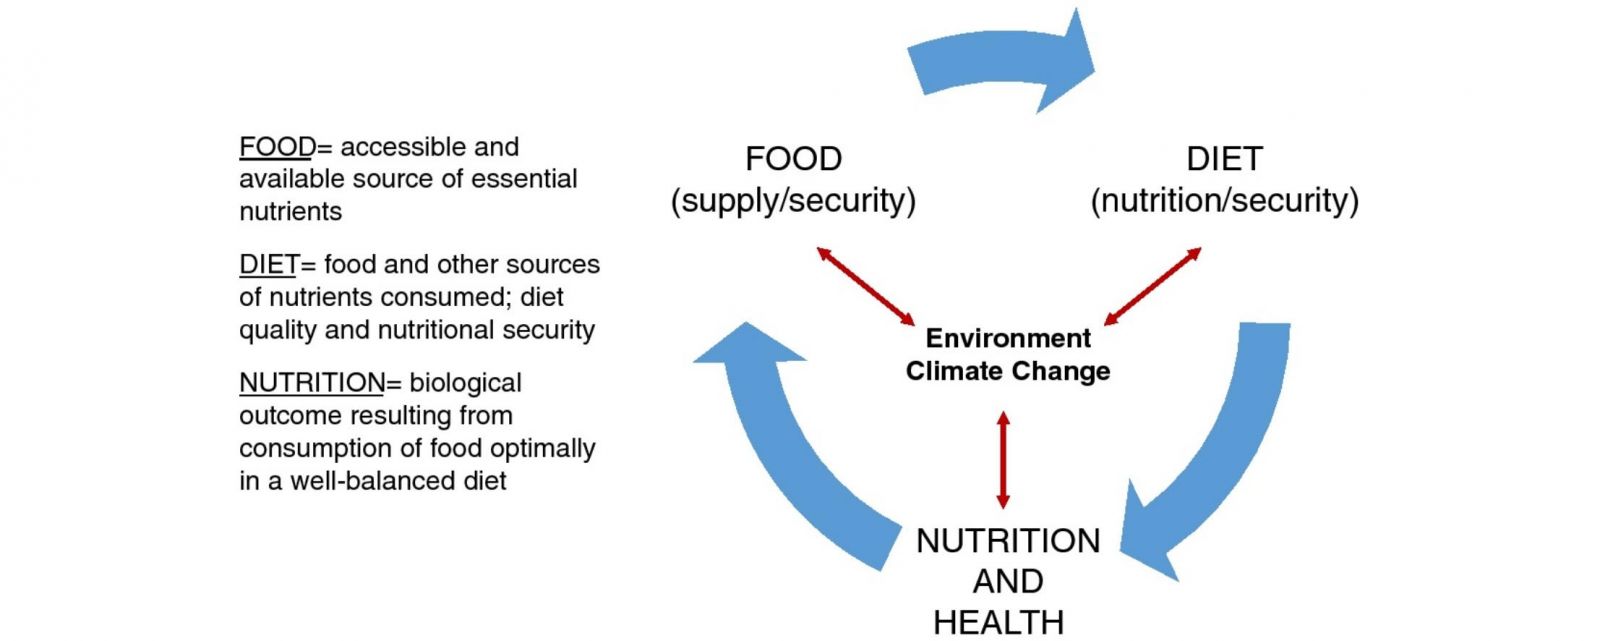 A figure demonstrating the intersection between nutrition,food, diet, and environmental change. Source: Raiten & Aimone, 2017